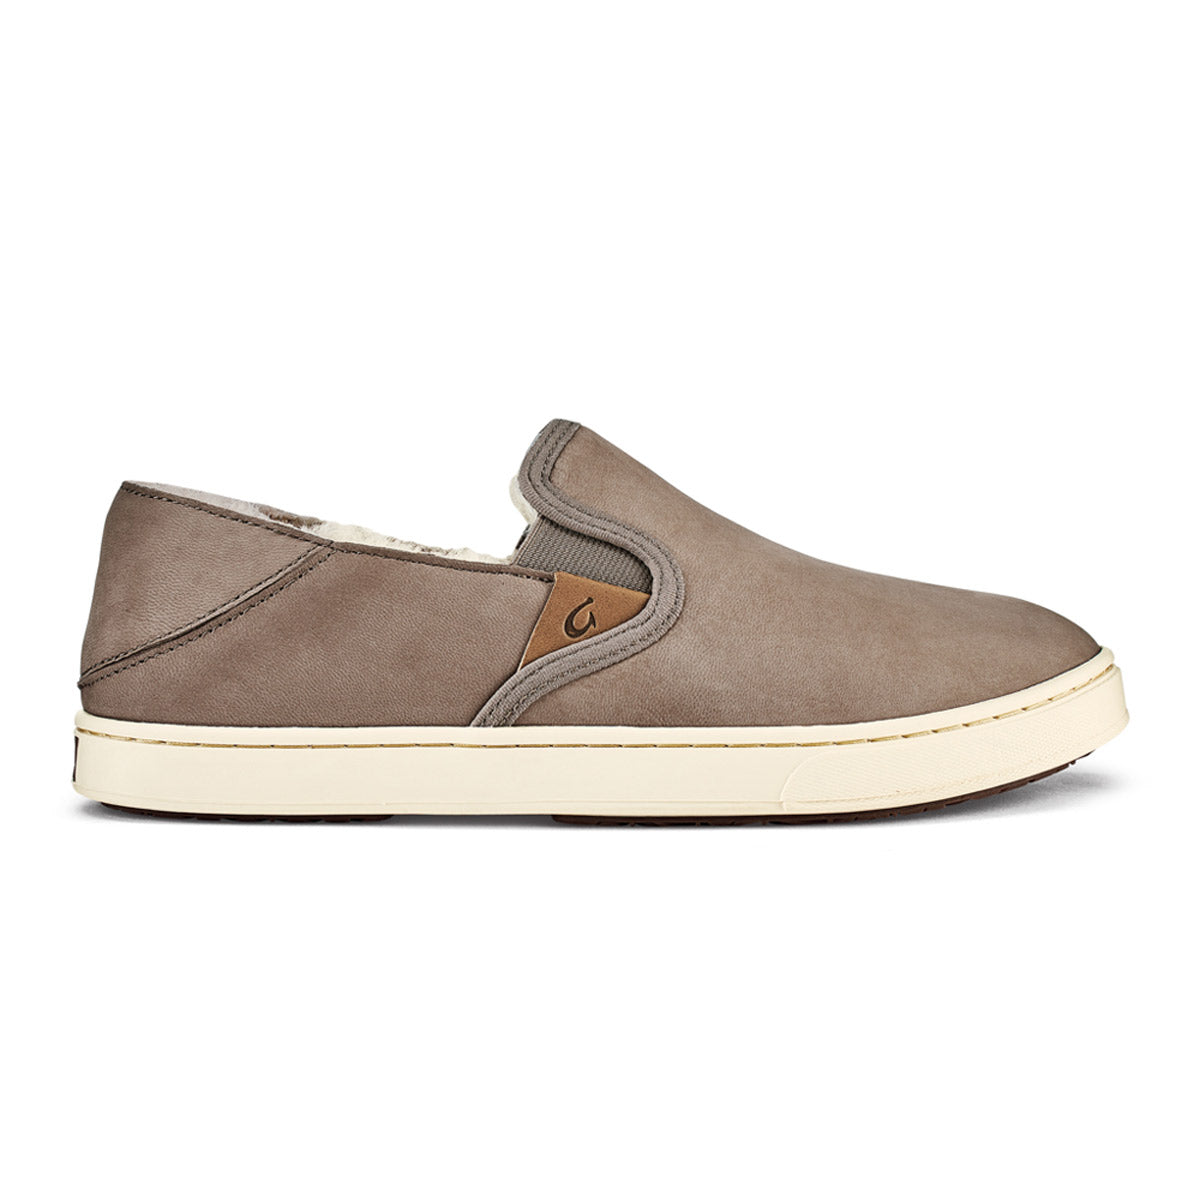 A single OLUKAI PEHUEA HEU TAUPE GREY/TAUPE GREY slip-on shoe with a white sole displayed against a white background.